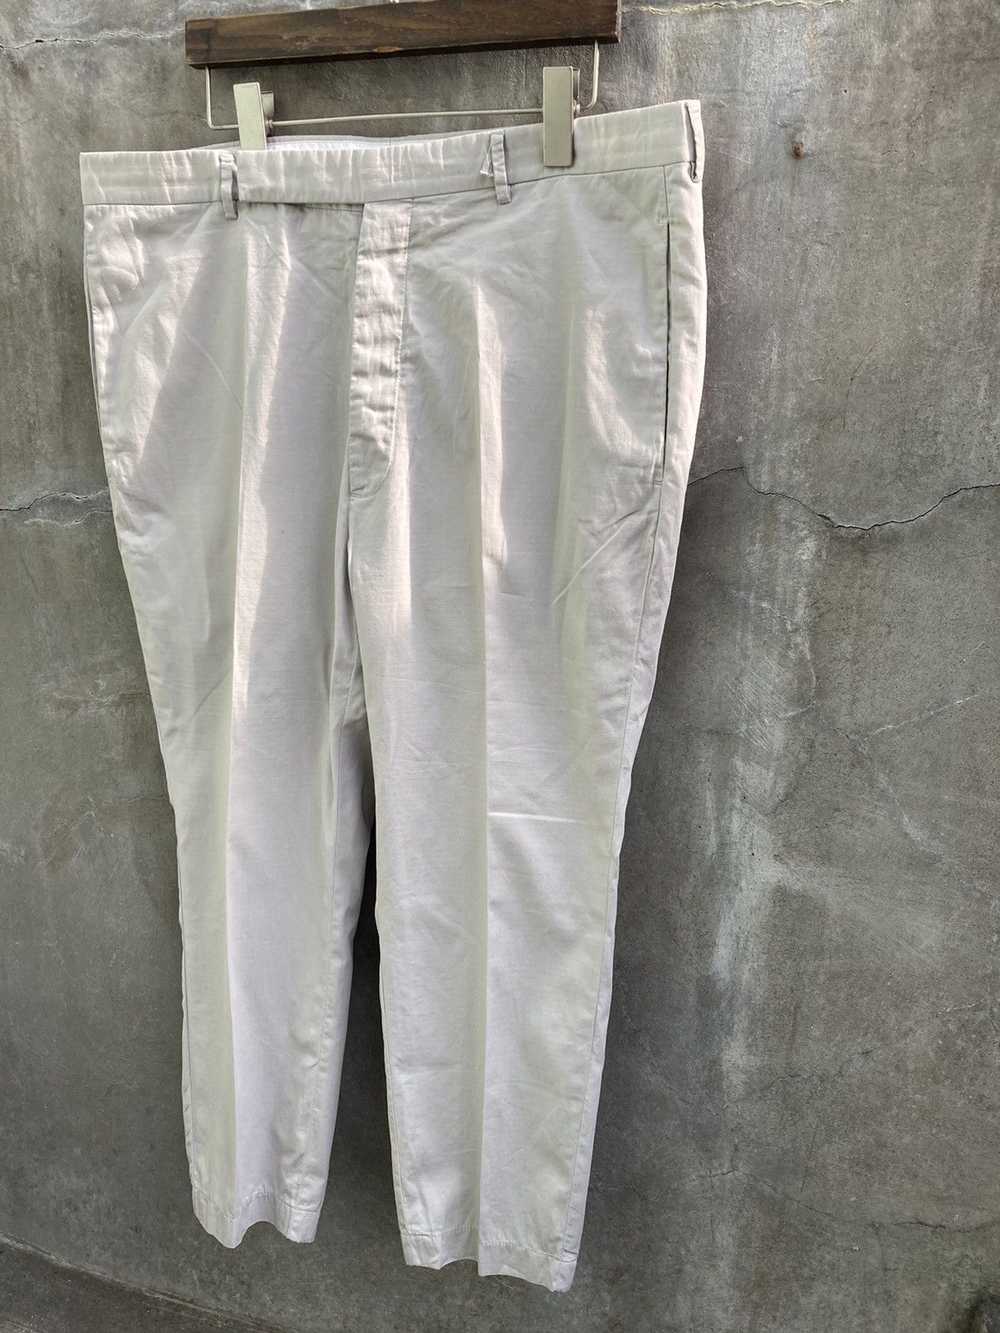 Rick Owens SS19 Babel Oyster Cotton Trousers - image 3